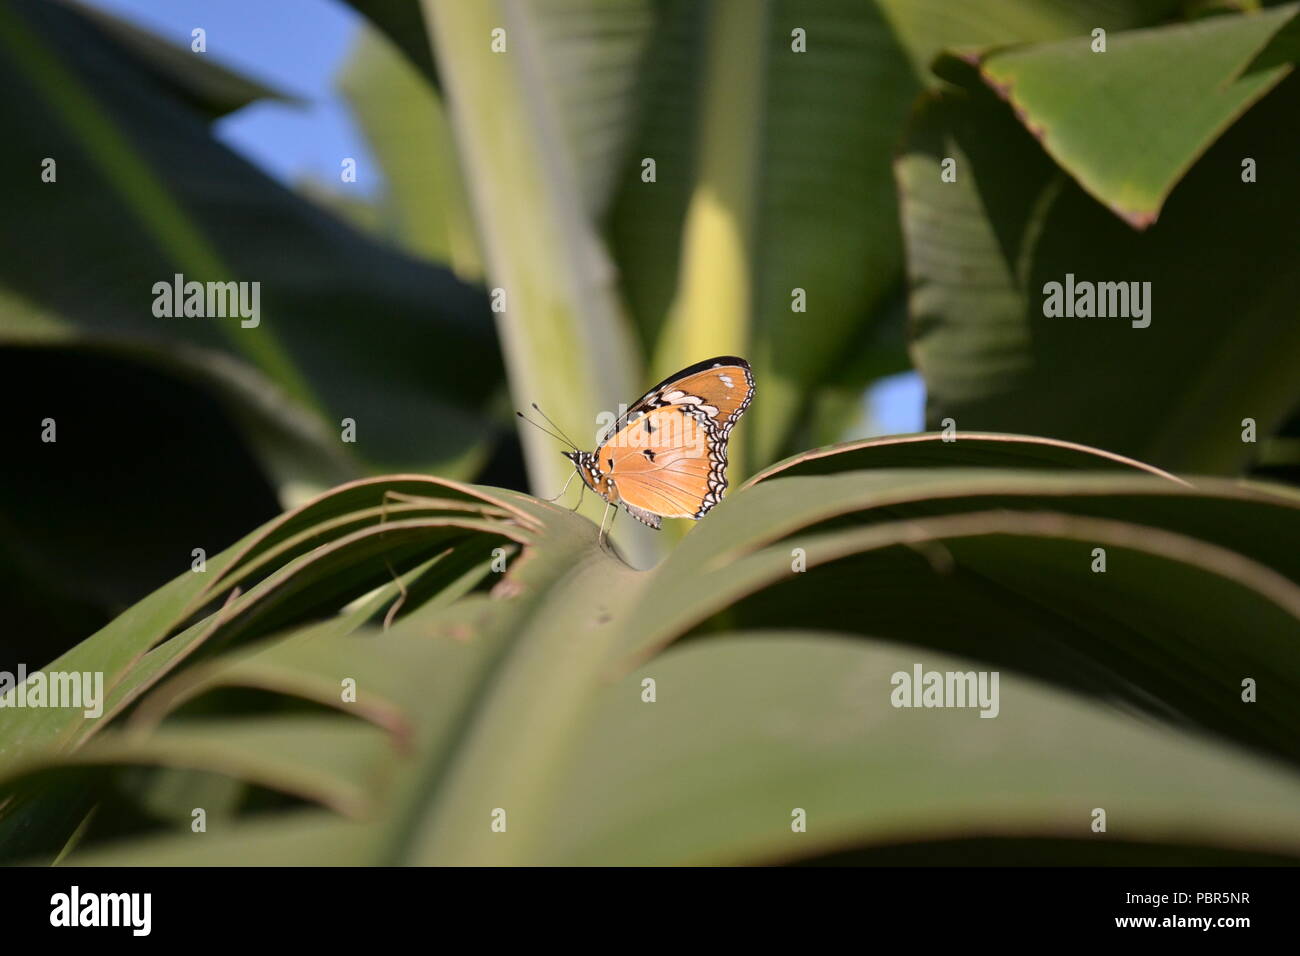 Butterfly resting on banana leaves Stock Photo